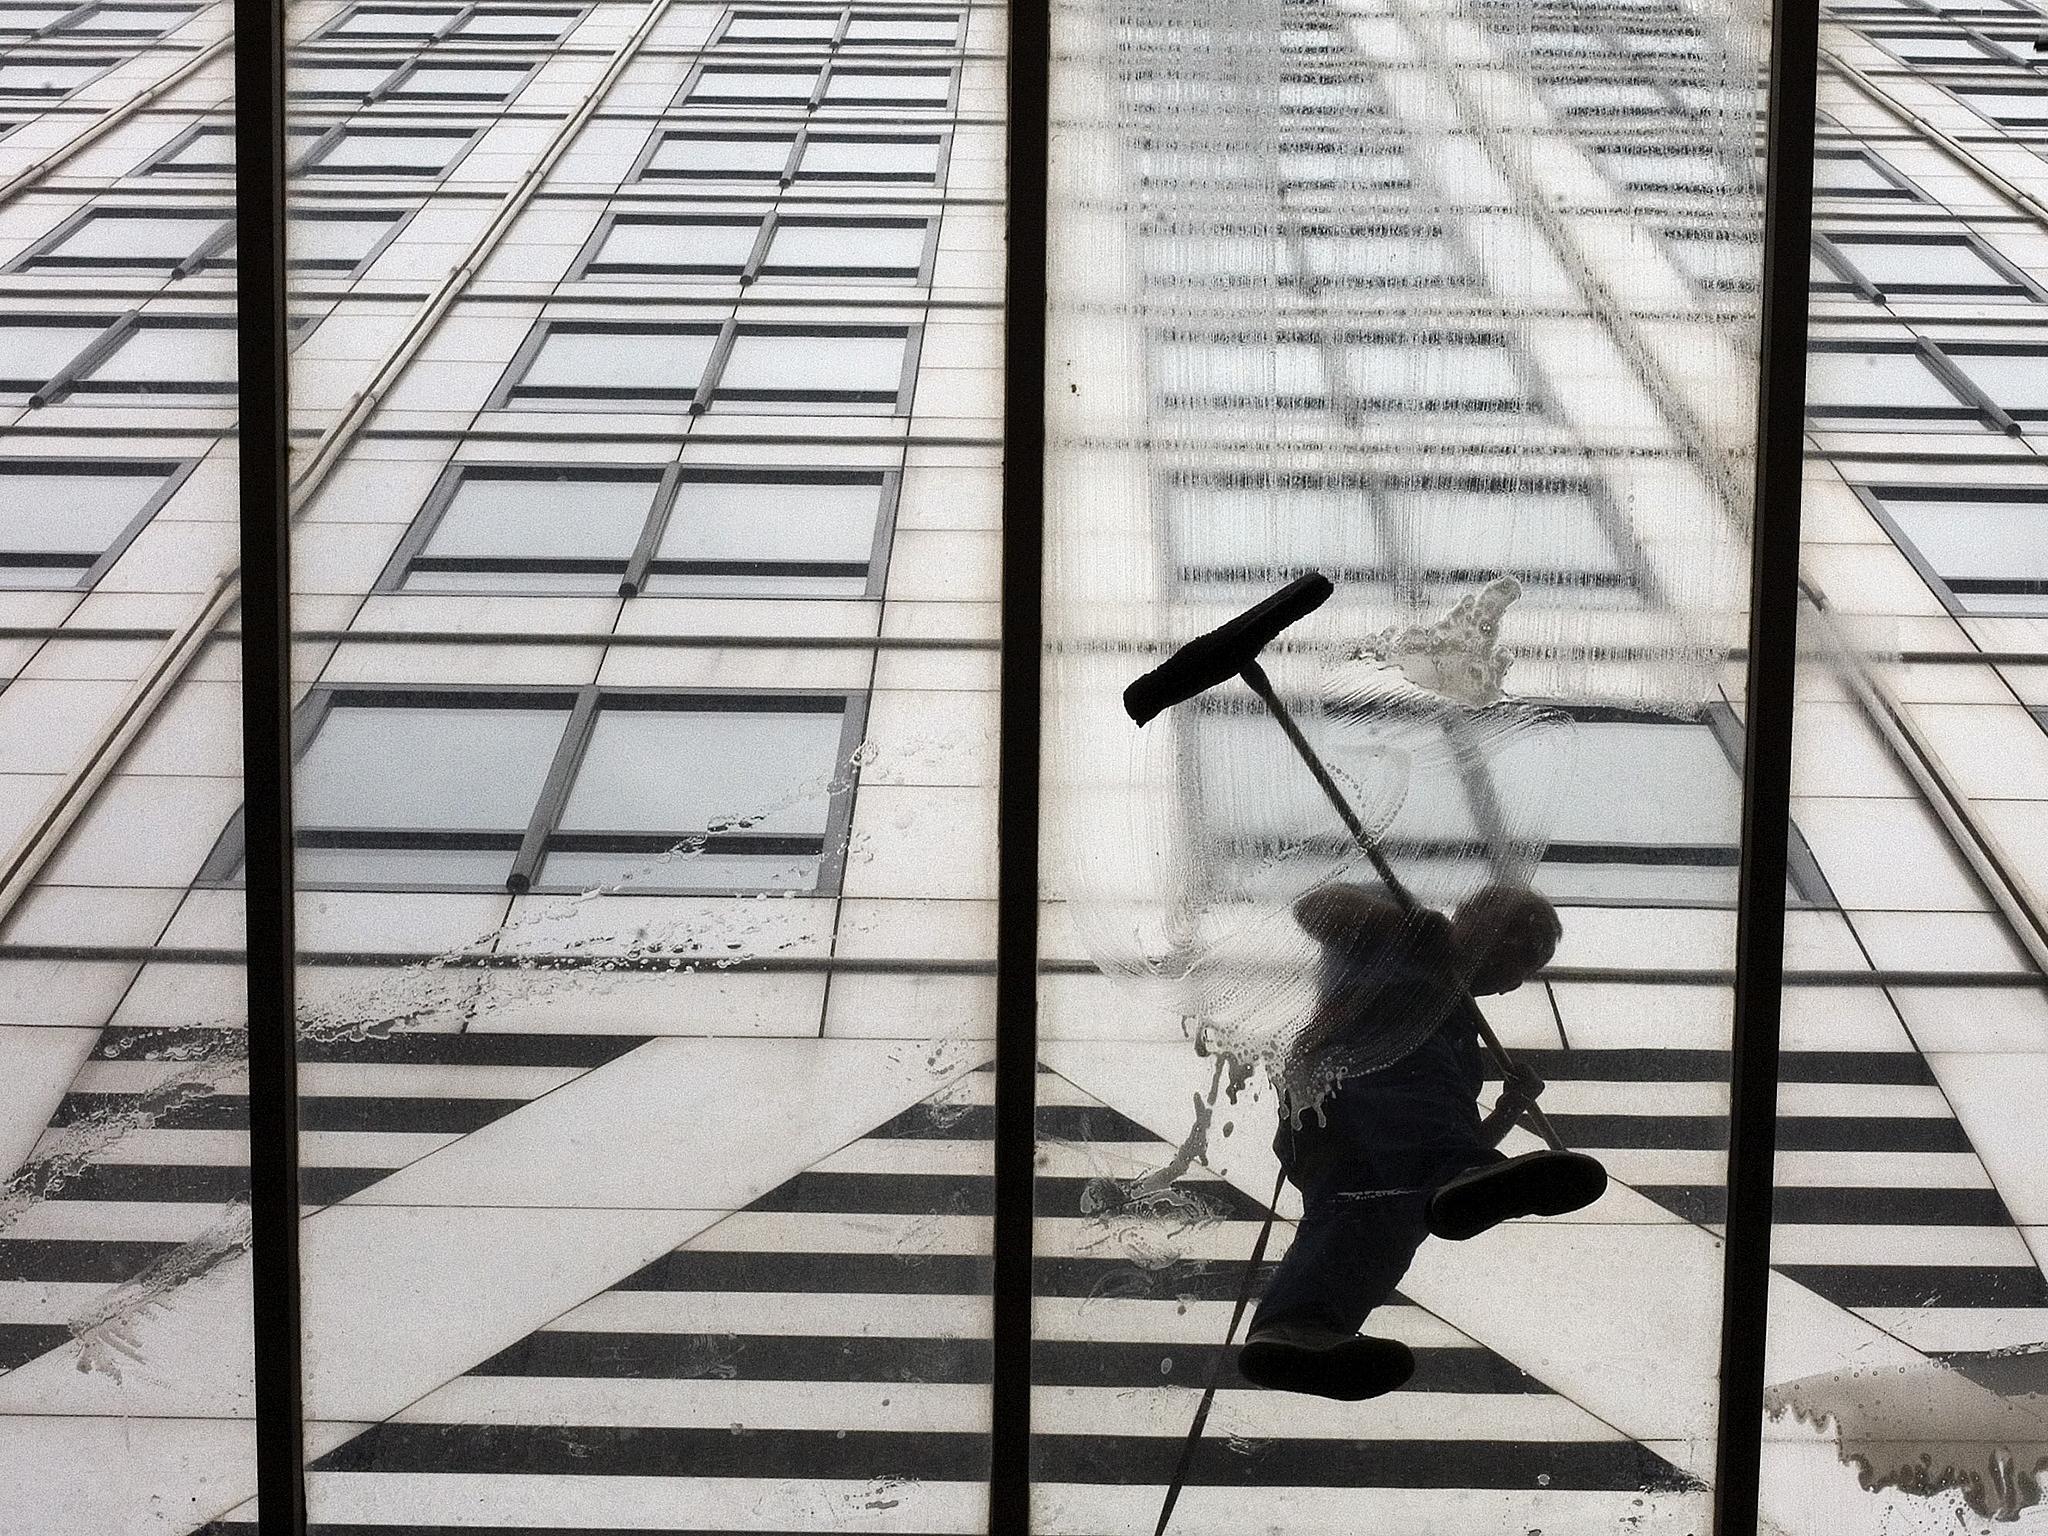 Workmen wash the entrance of 1 Canada Square in London's Canary Wharf, where the European Banking Authority is based - for now